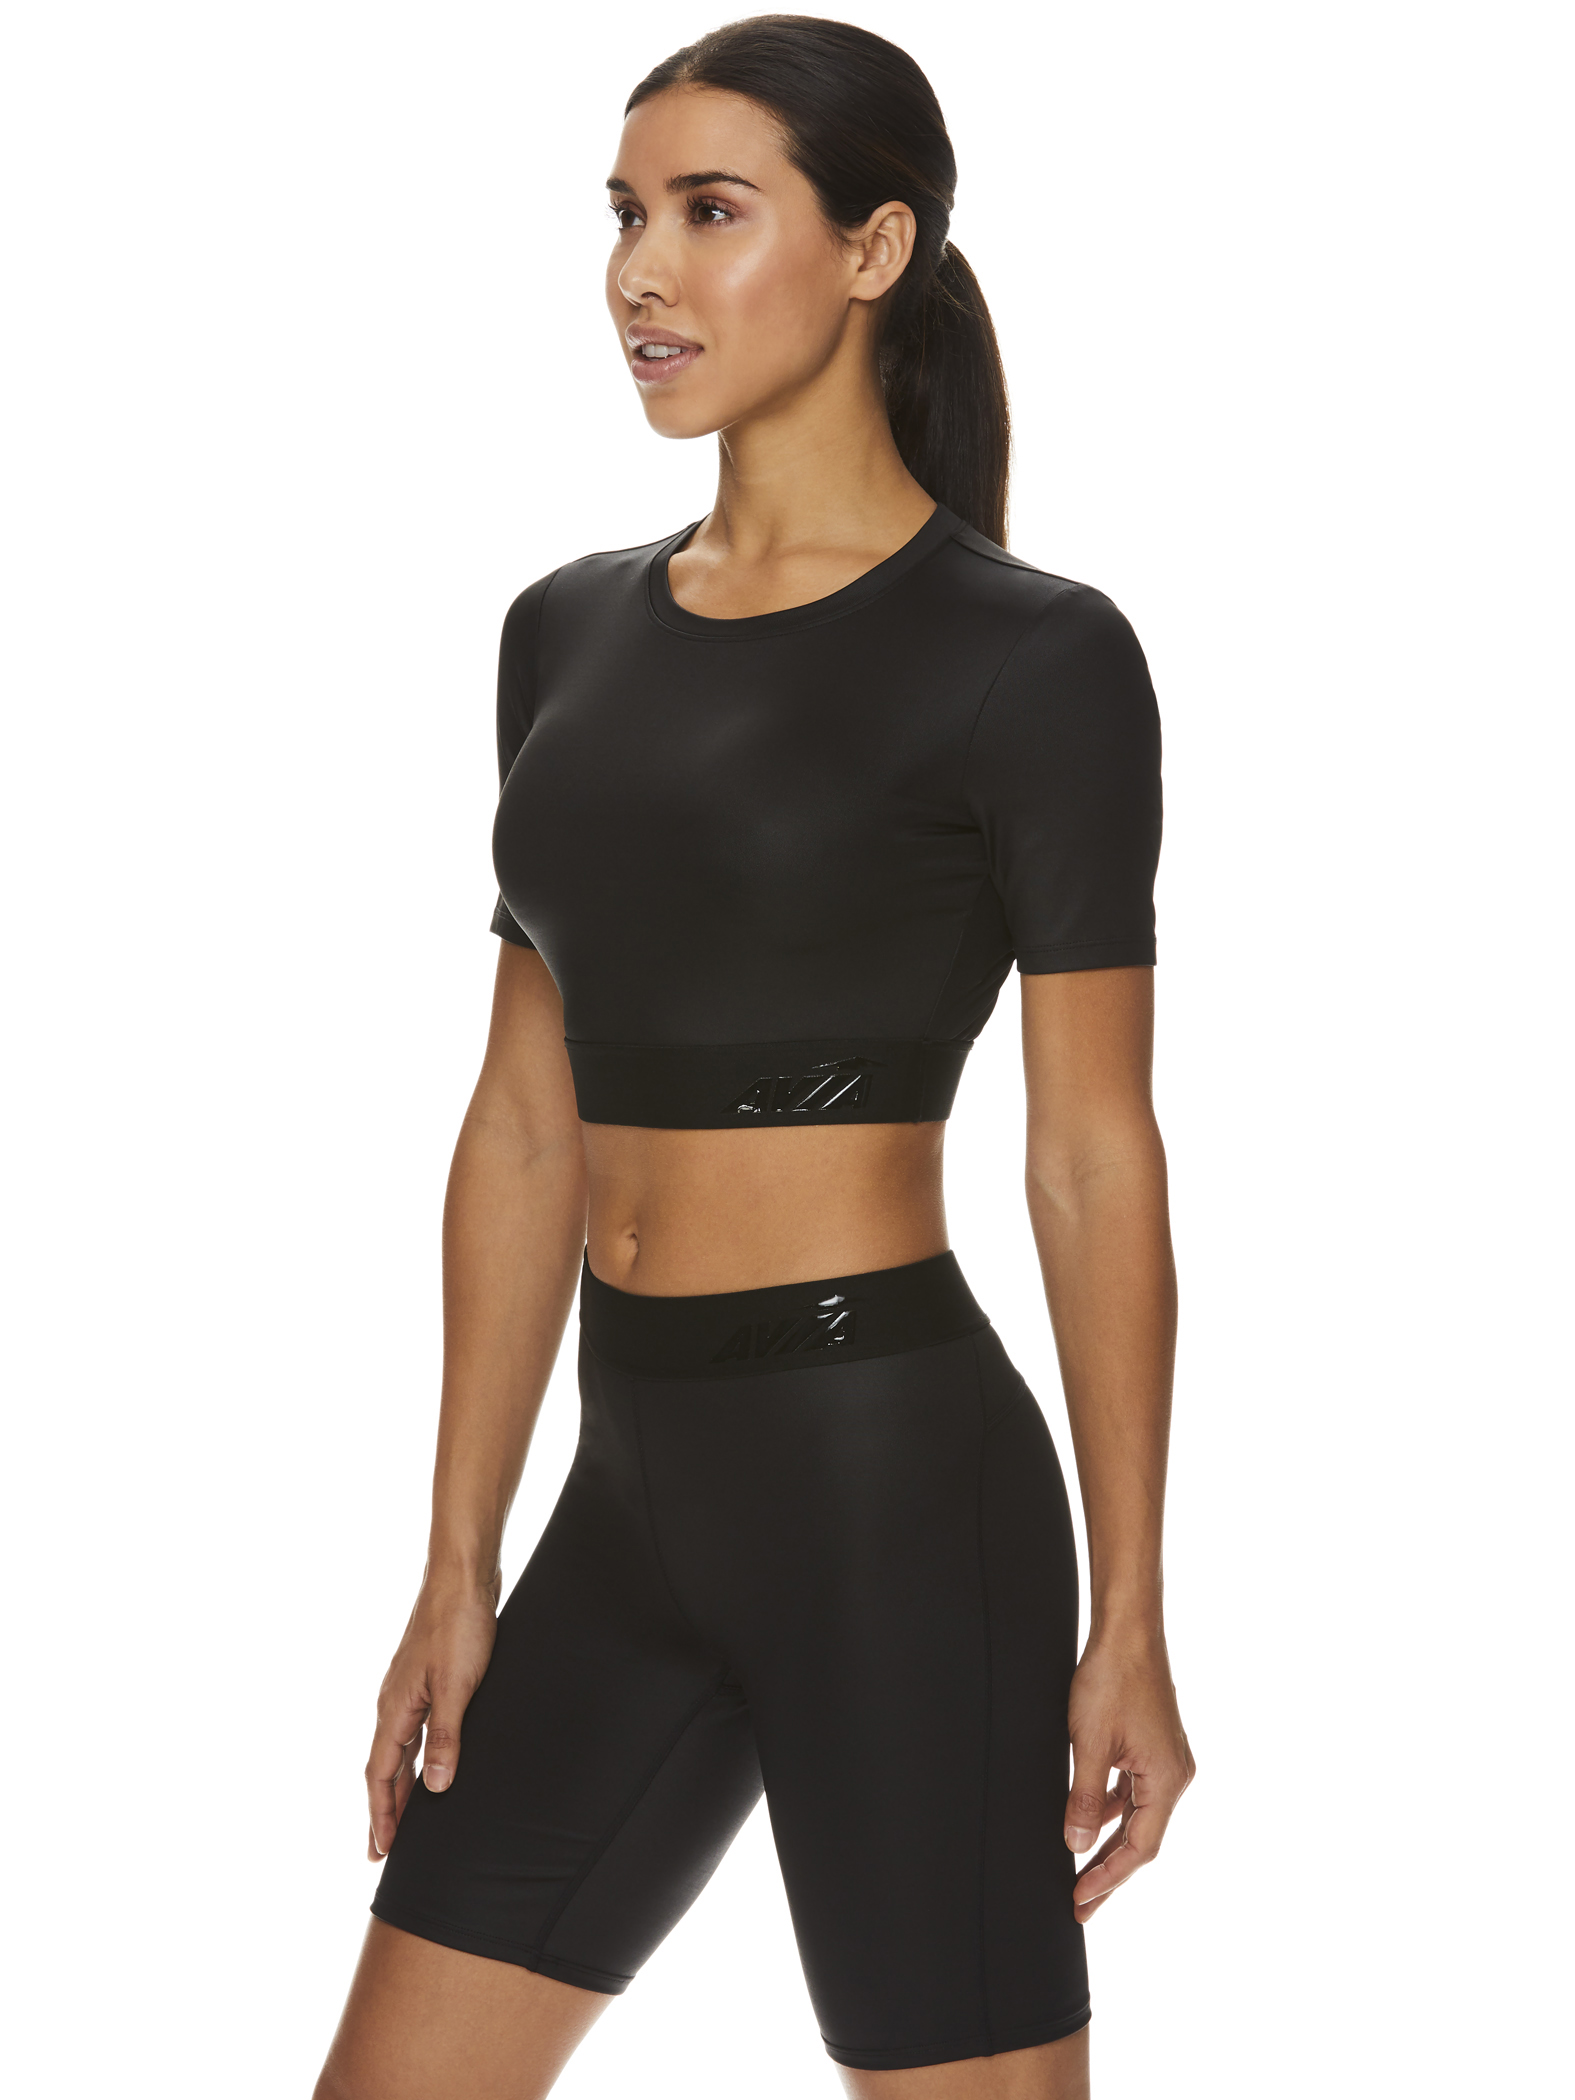 Avia Women's Active Ready Set Glow Cropped Tee - image 2 of 4